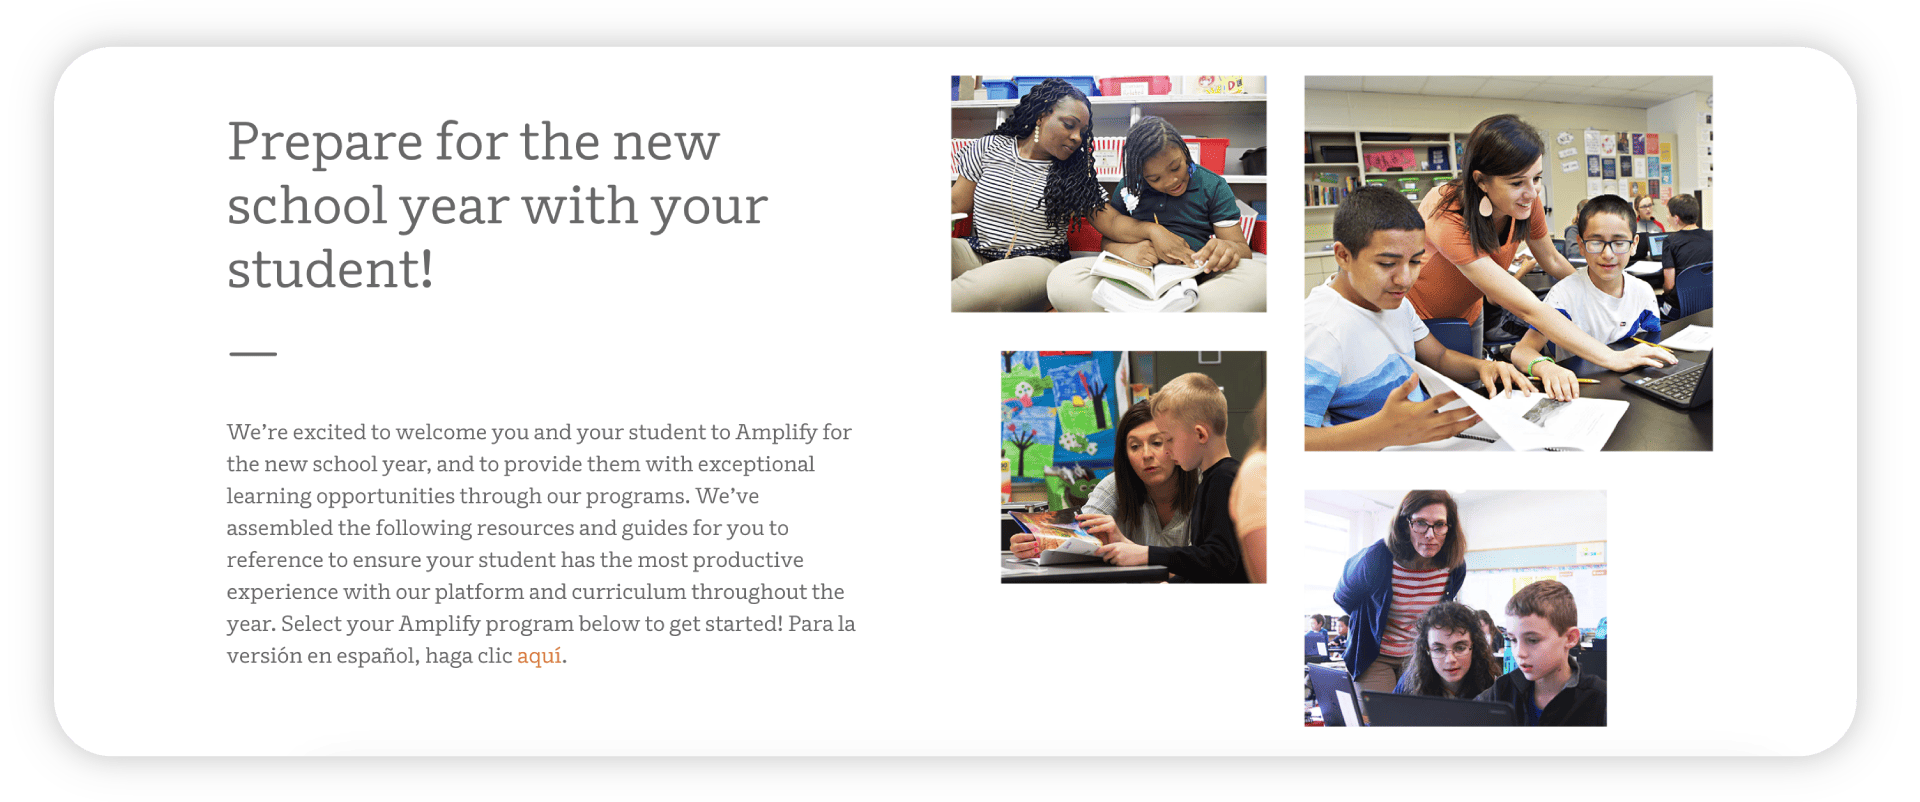 Web banner featuring a diverse group of students and a teacher engaging in classroom activities with text promoting new features of the CKLA educational program for the new school year.